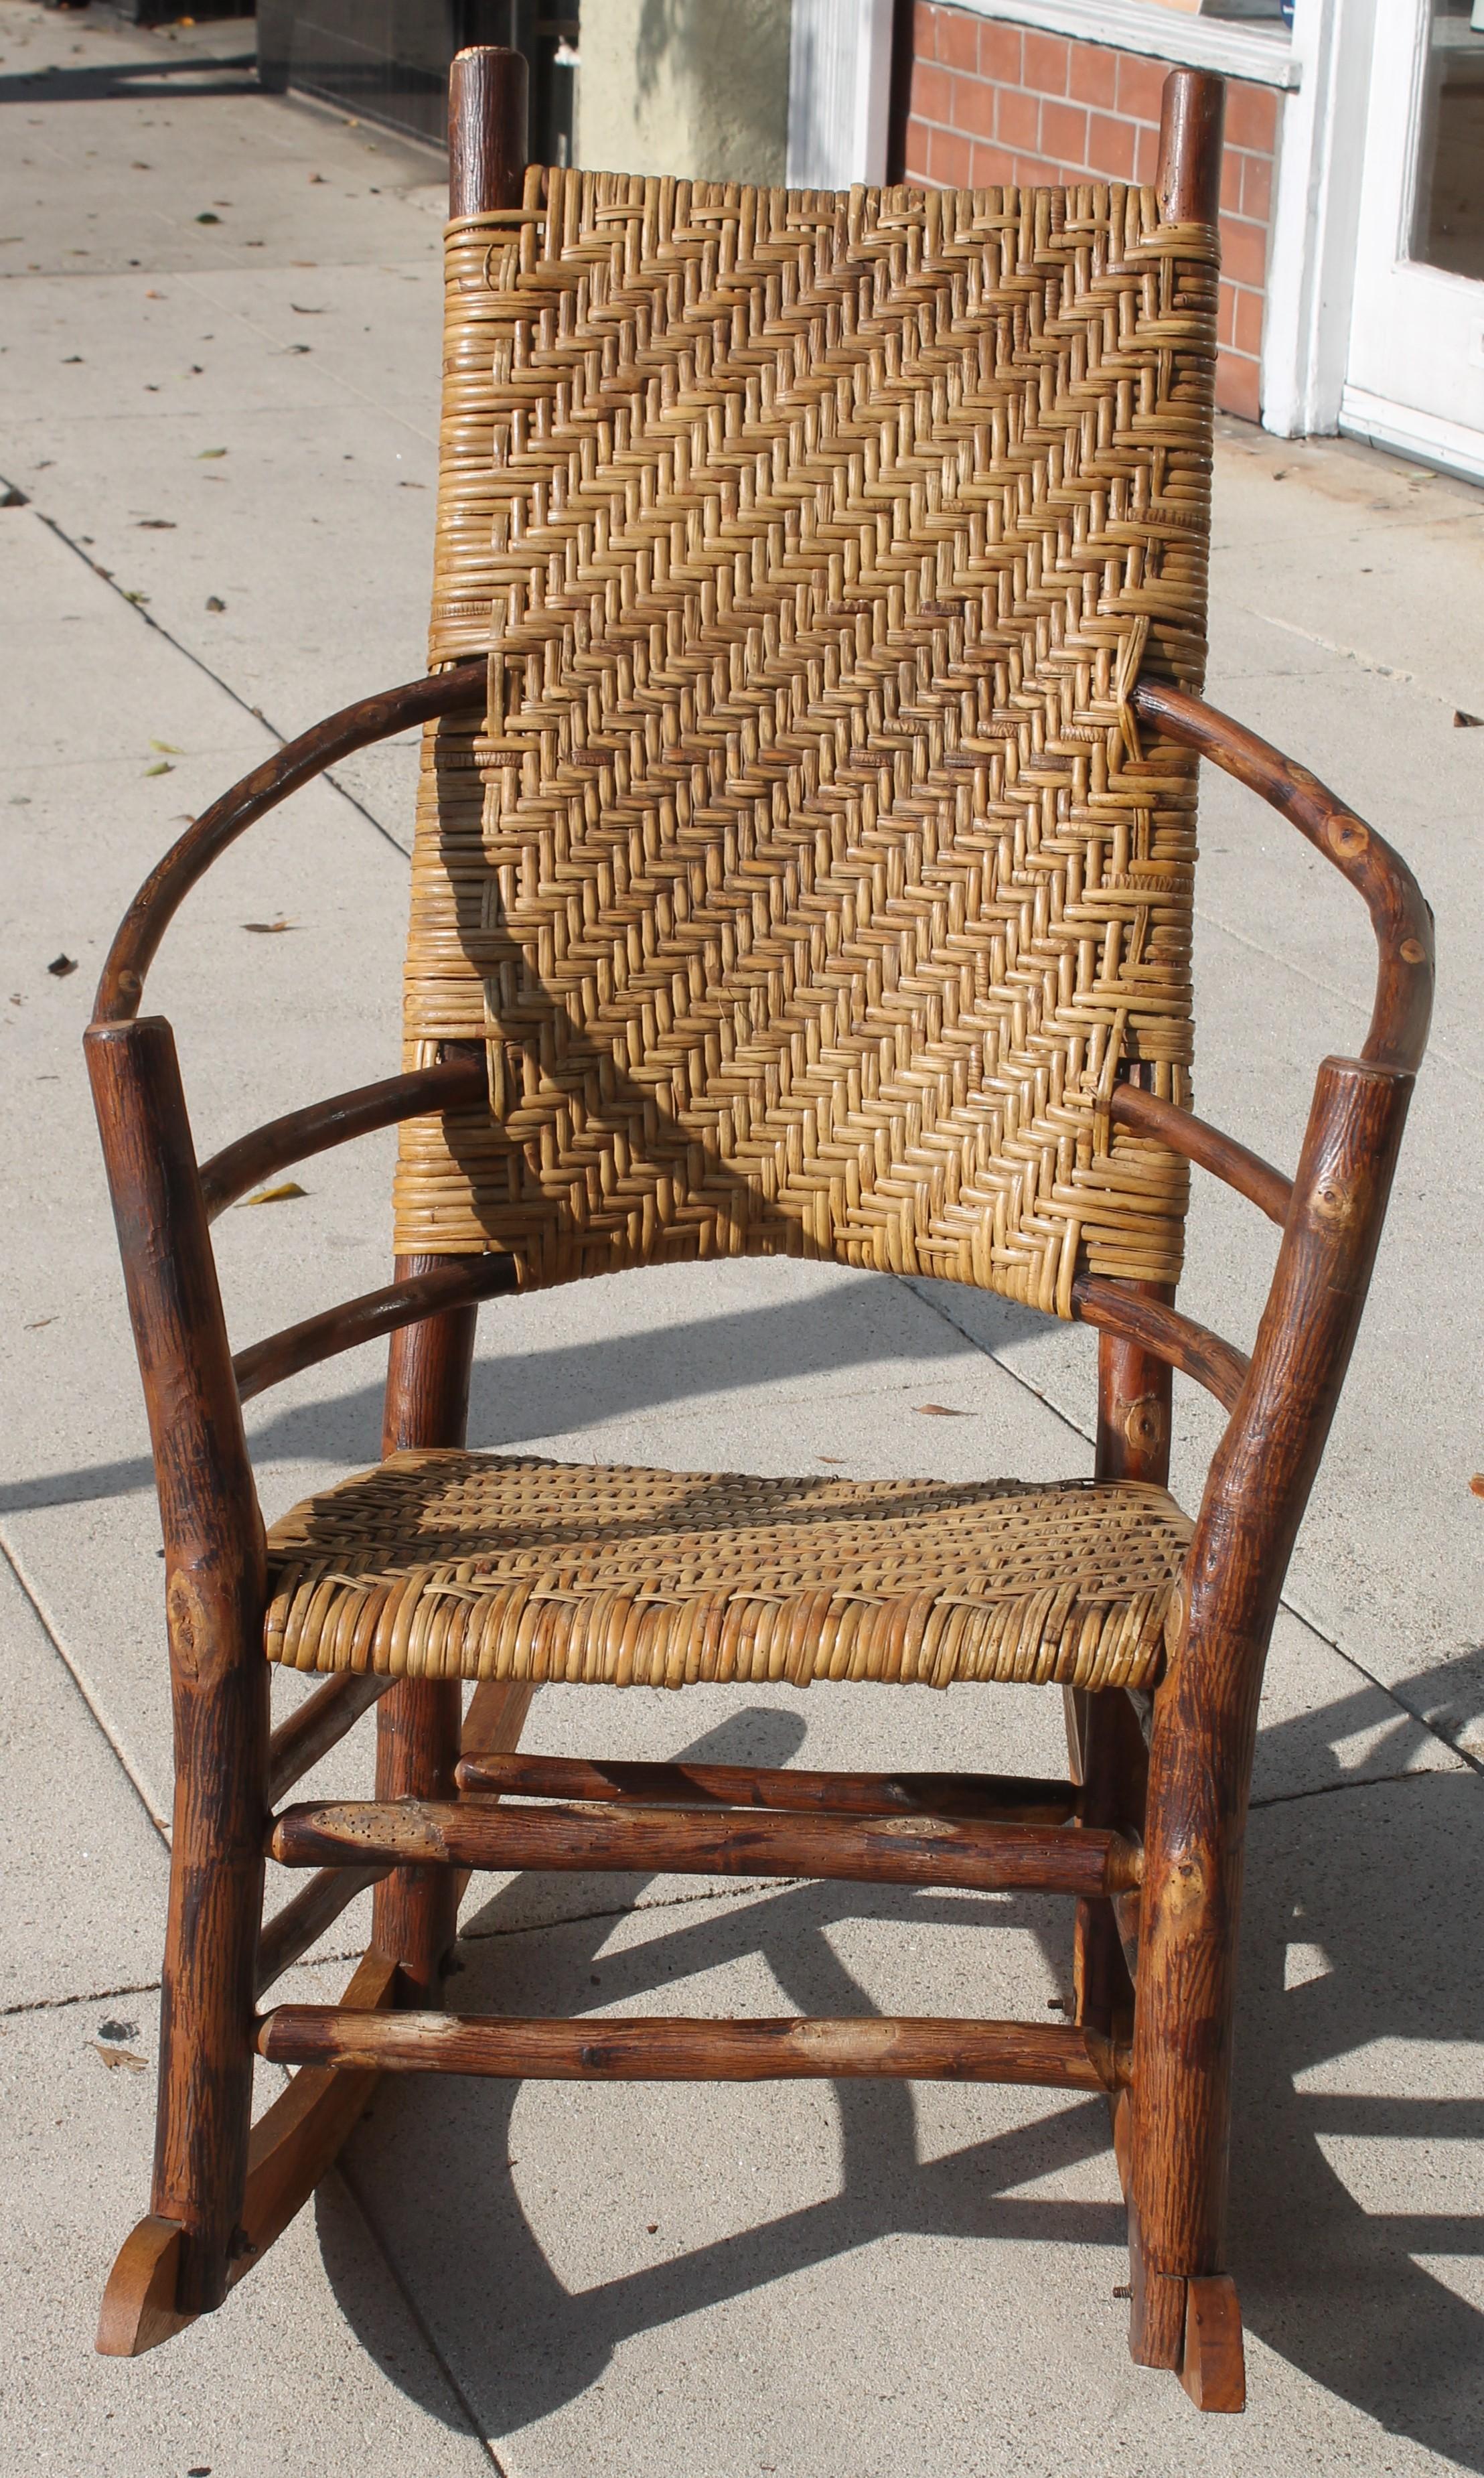 This amazing high back Old Hickory, Martinsville, Indiana & barrel back Old Hickory rocking chair. Primarily used on a covered porch or patio these rocking chairs are fantastic indoors as well. This rocker has the original hand woven split seat and